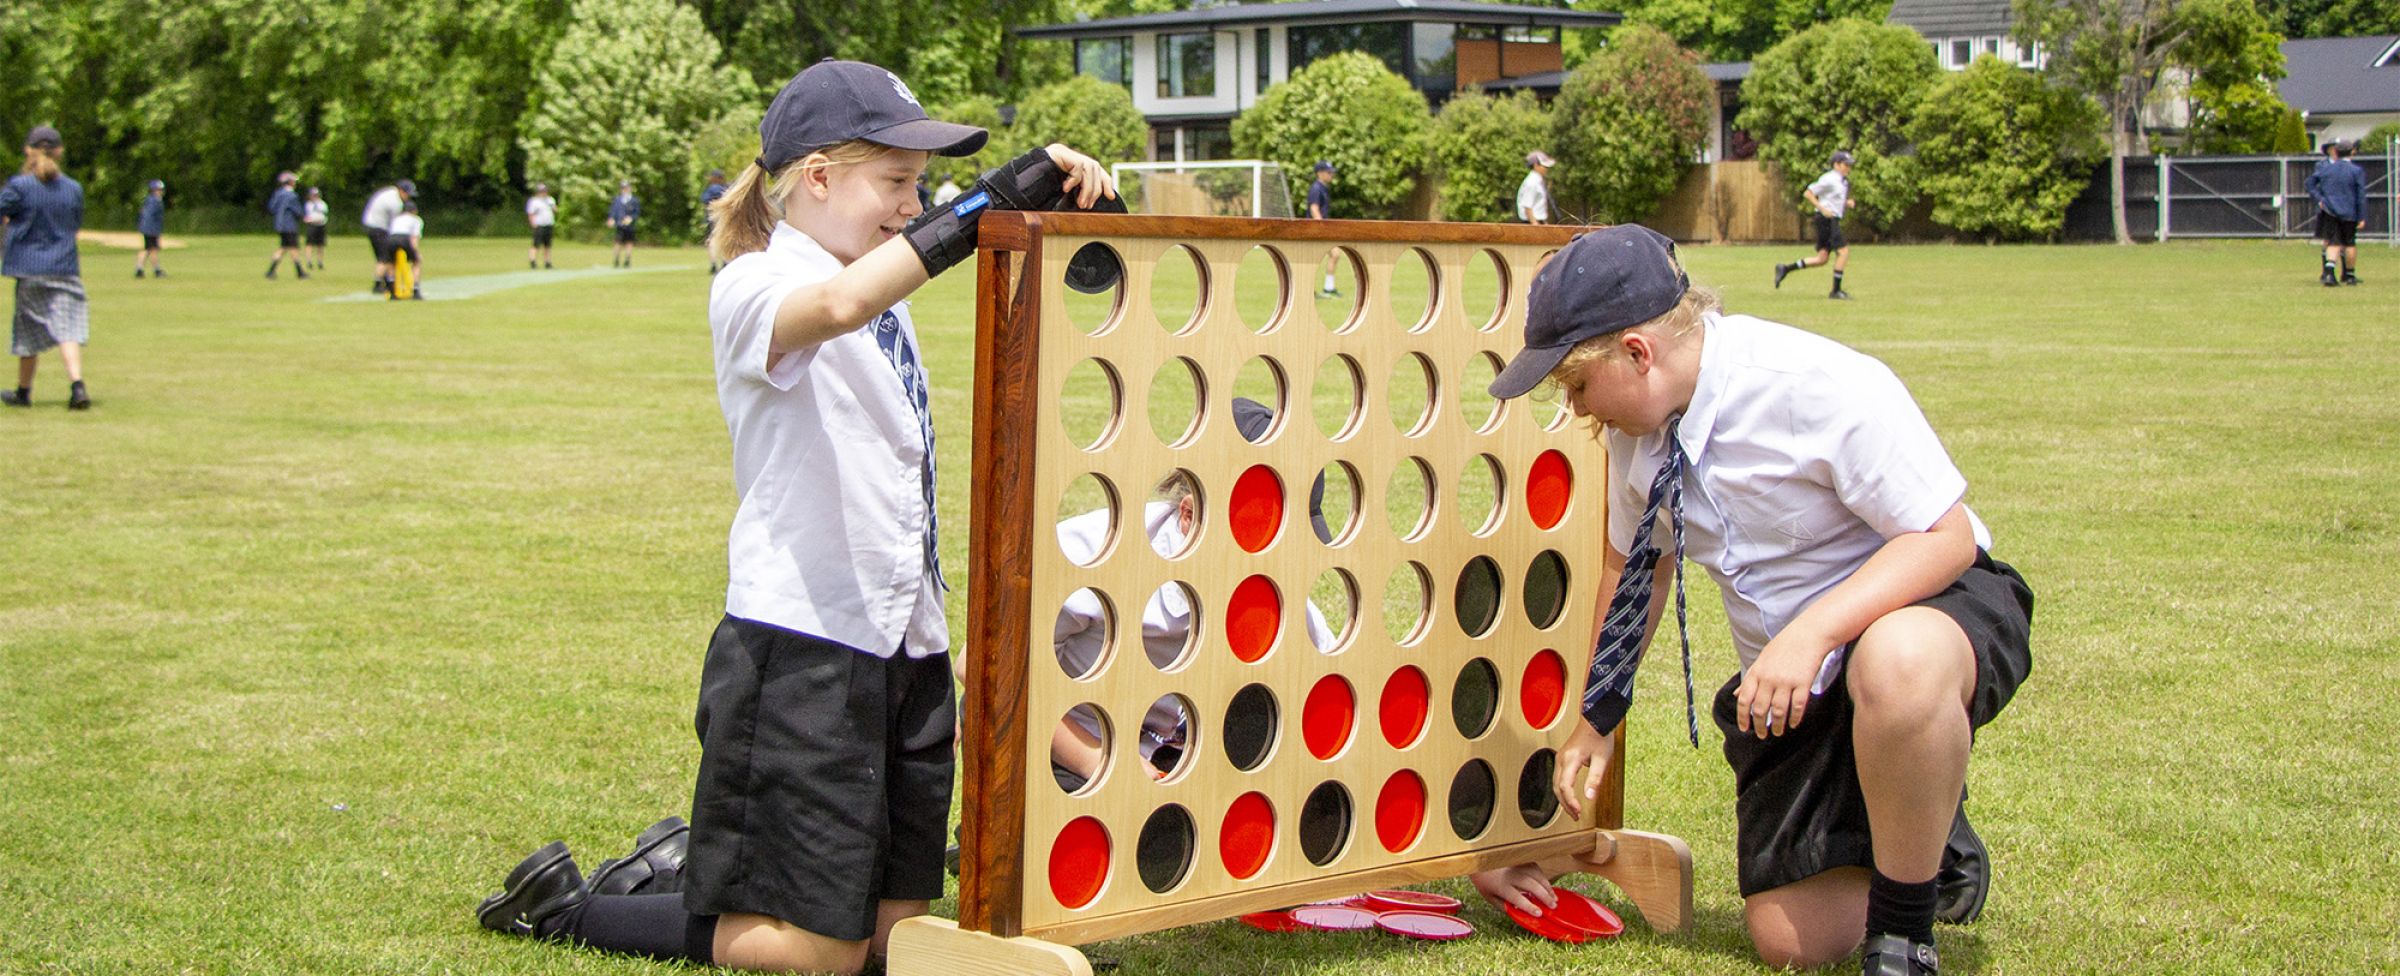 Students playing with outdoor connect four.